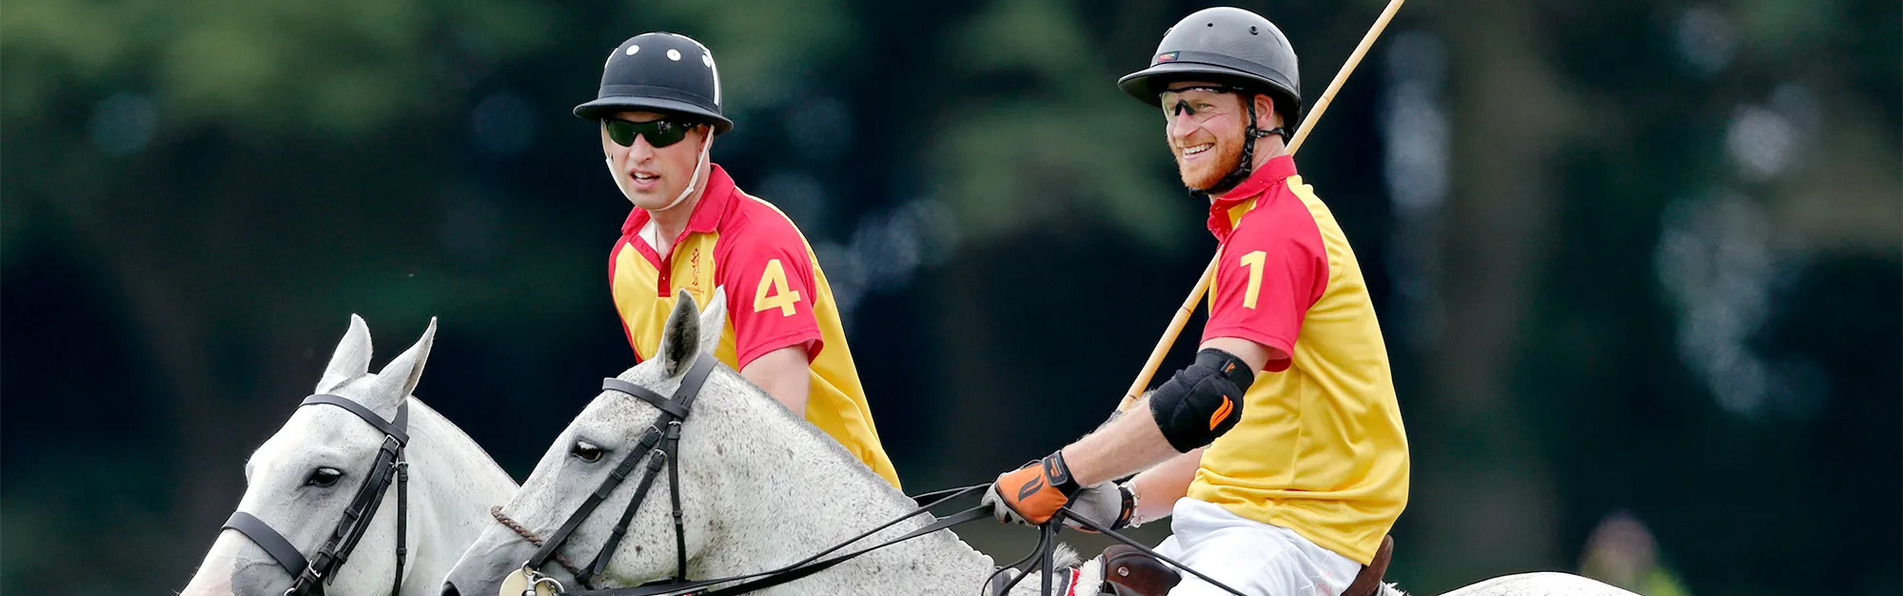 https://www.kronopolo.es/image/cache/catalog/Blog%20Banners/prince%20harry%20and%20prince%20william%20playing%20polo-1903x596.jpg